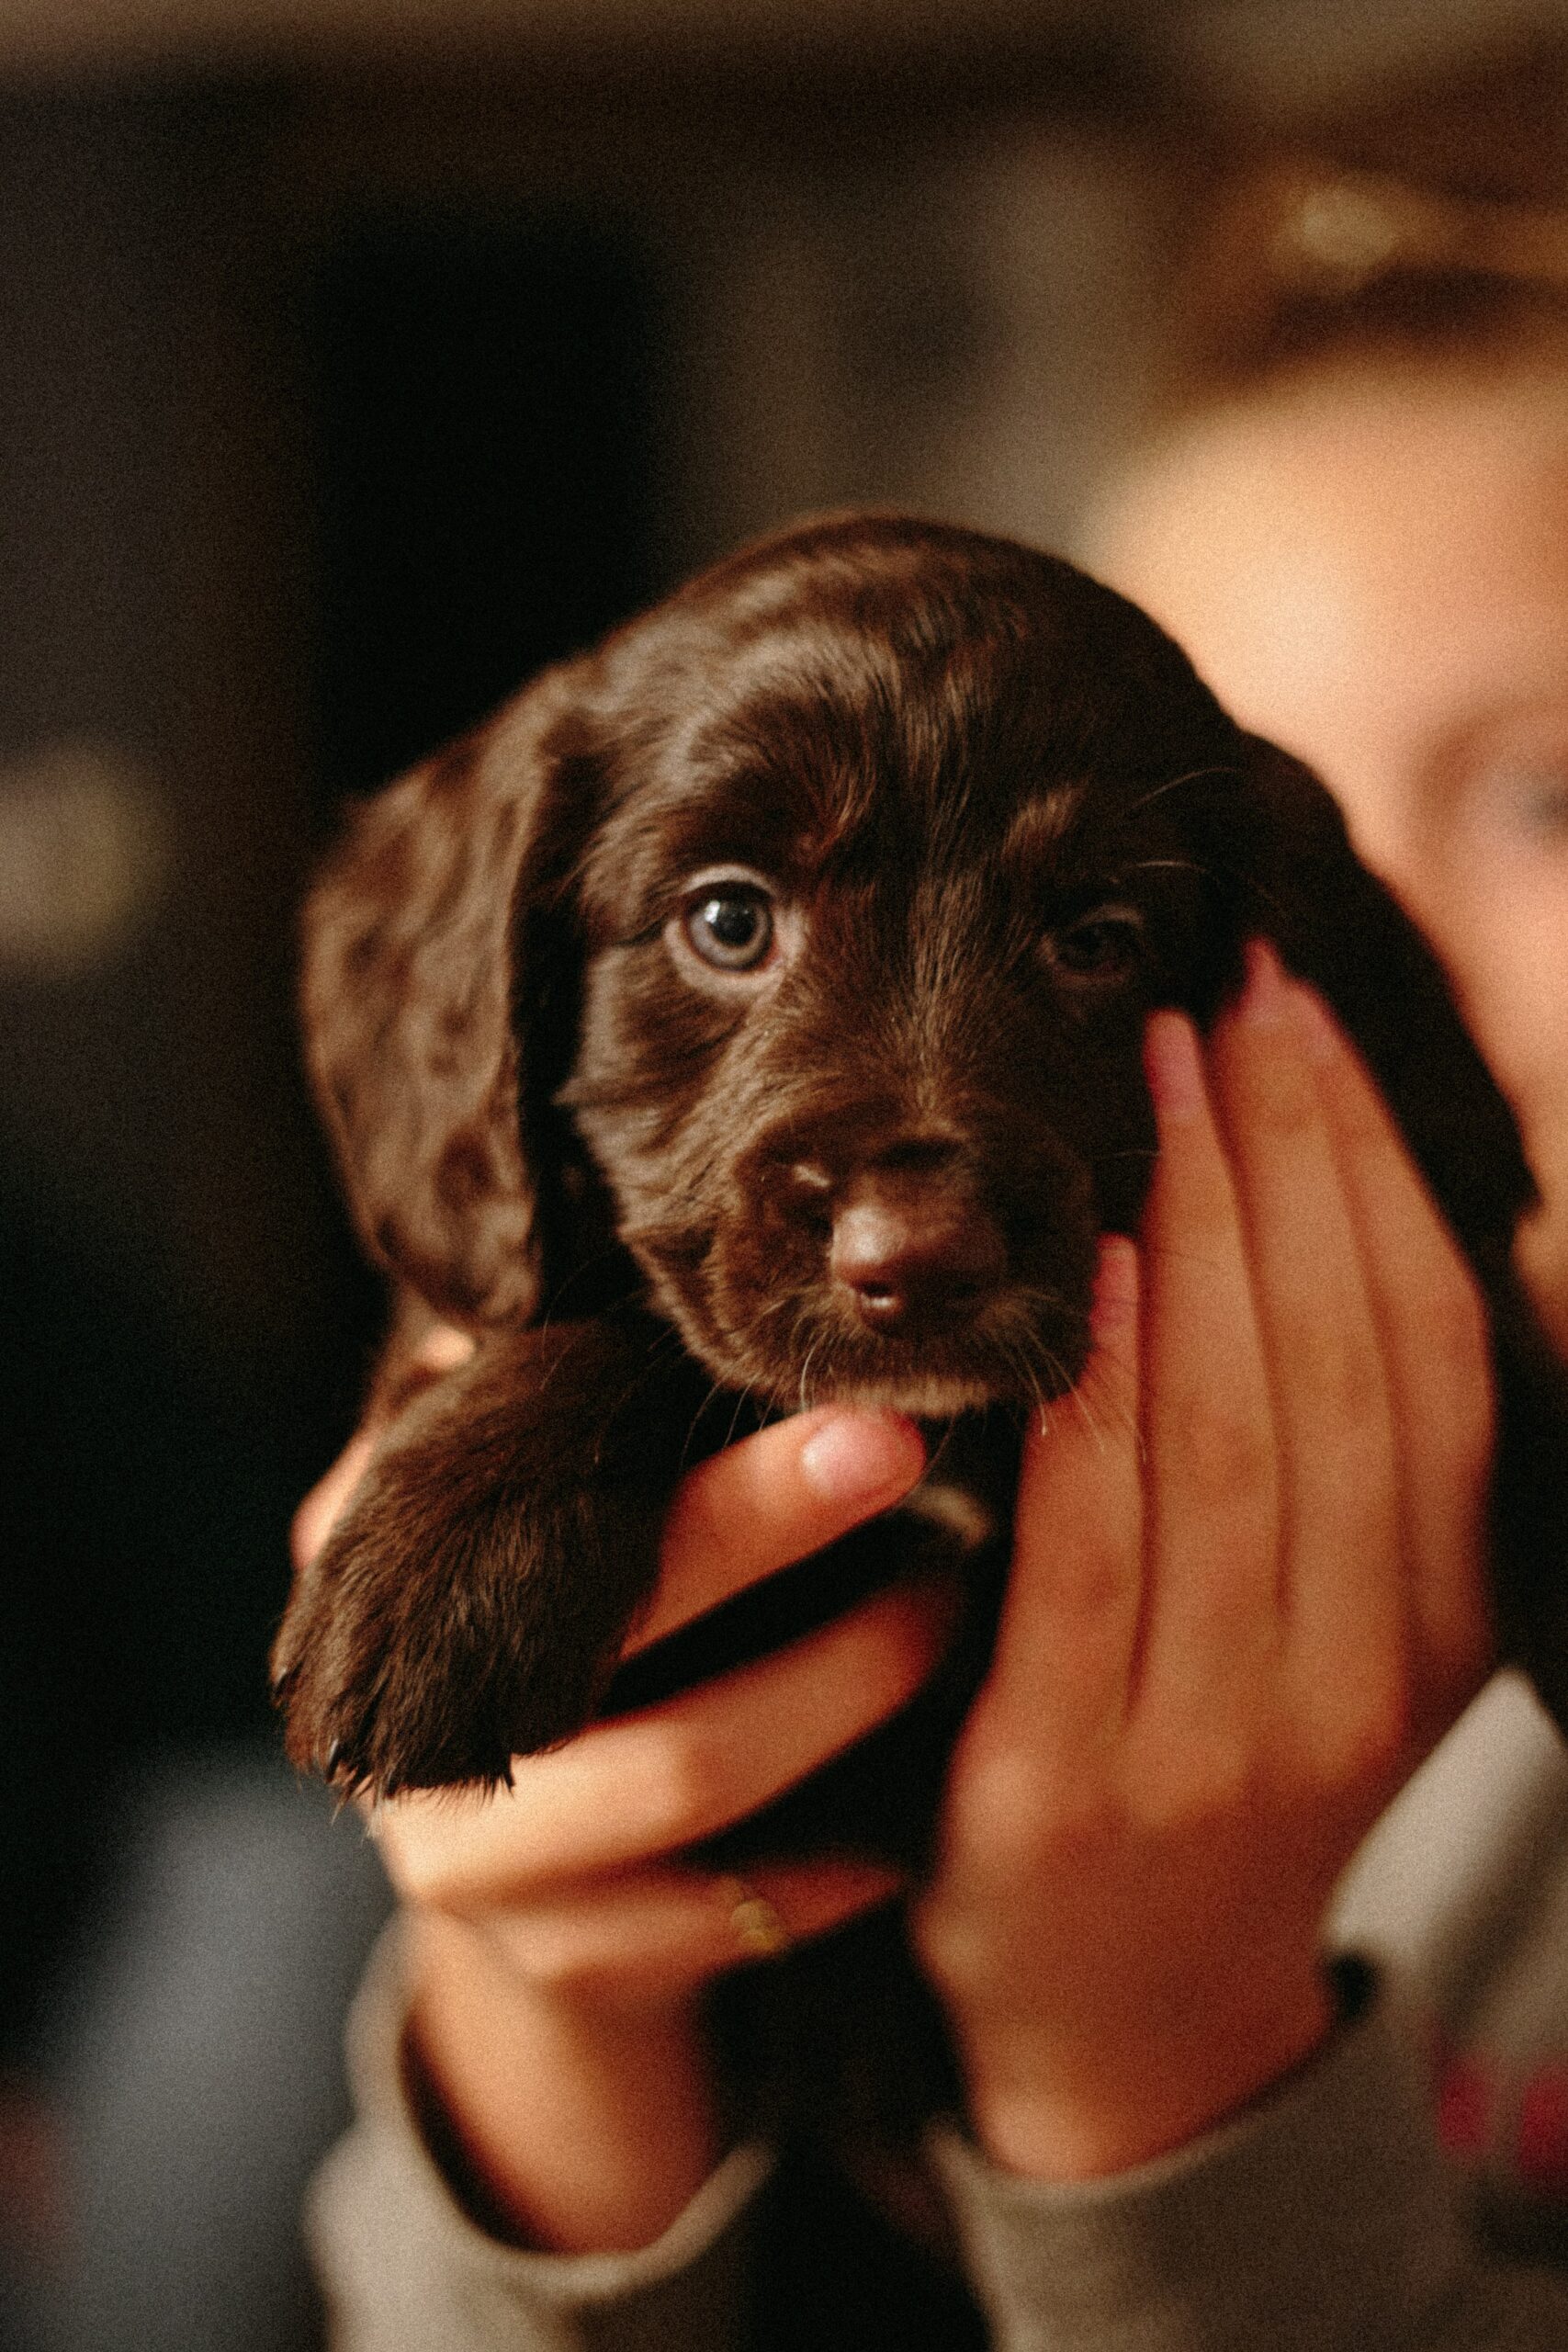 Brown puppy being held